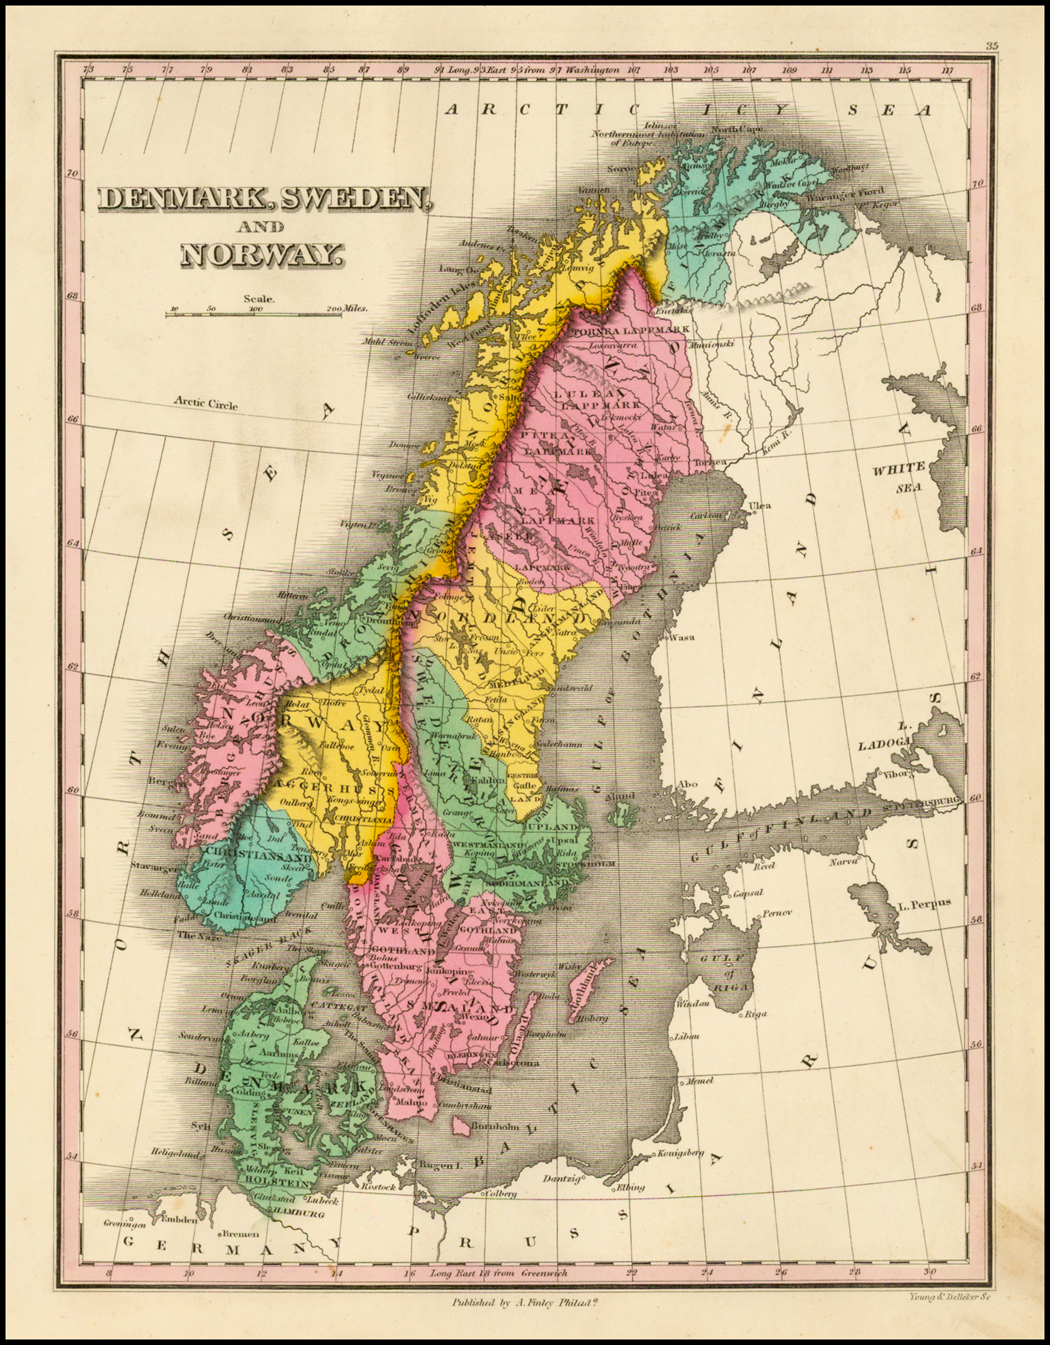 Denmark, Sweden and Norway - Barry Lawrence Ruderman Antique Maps Inc.